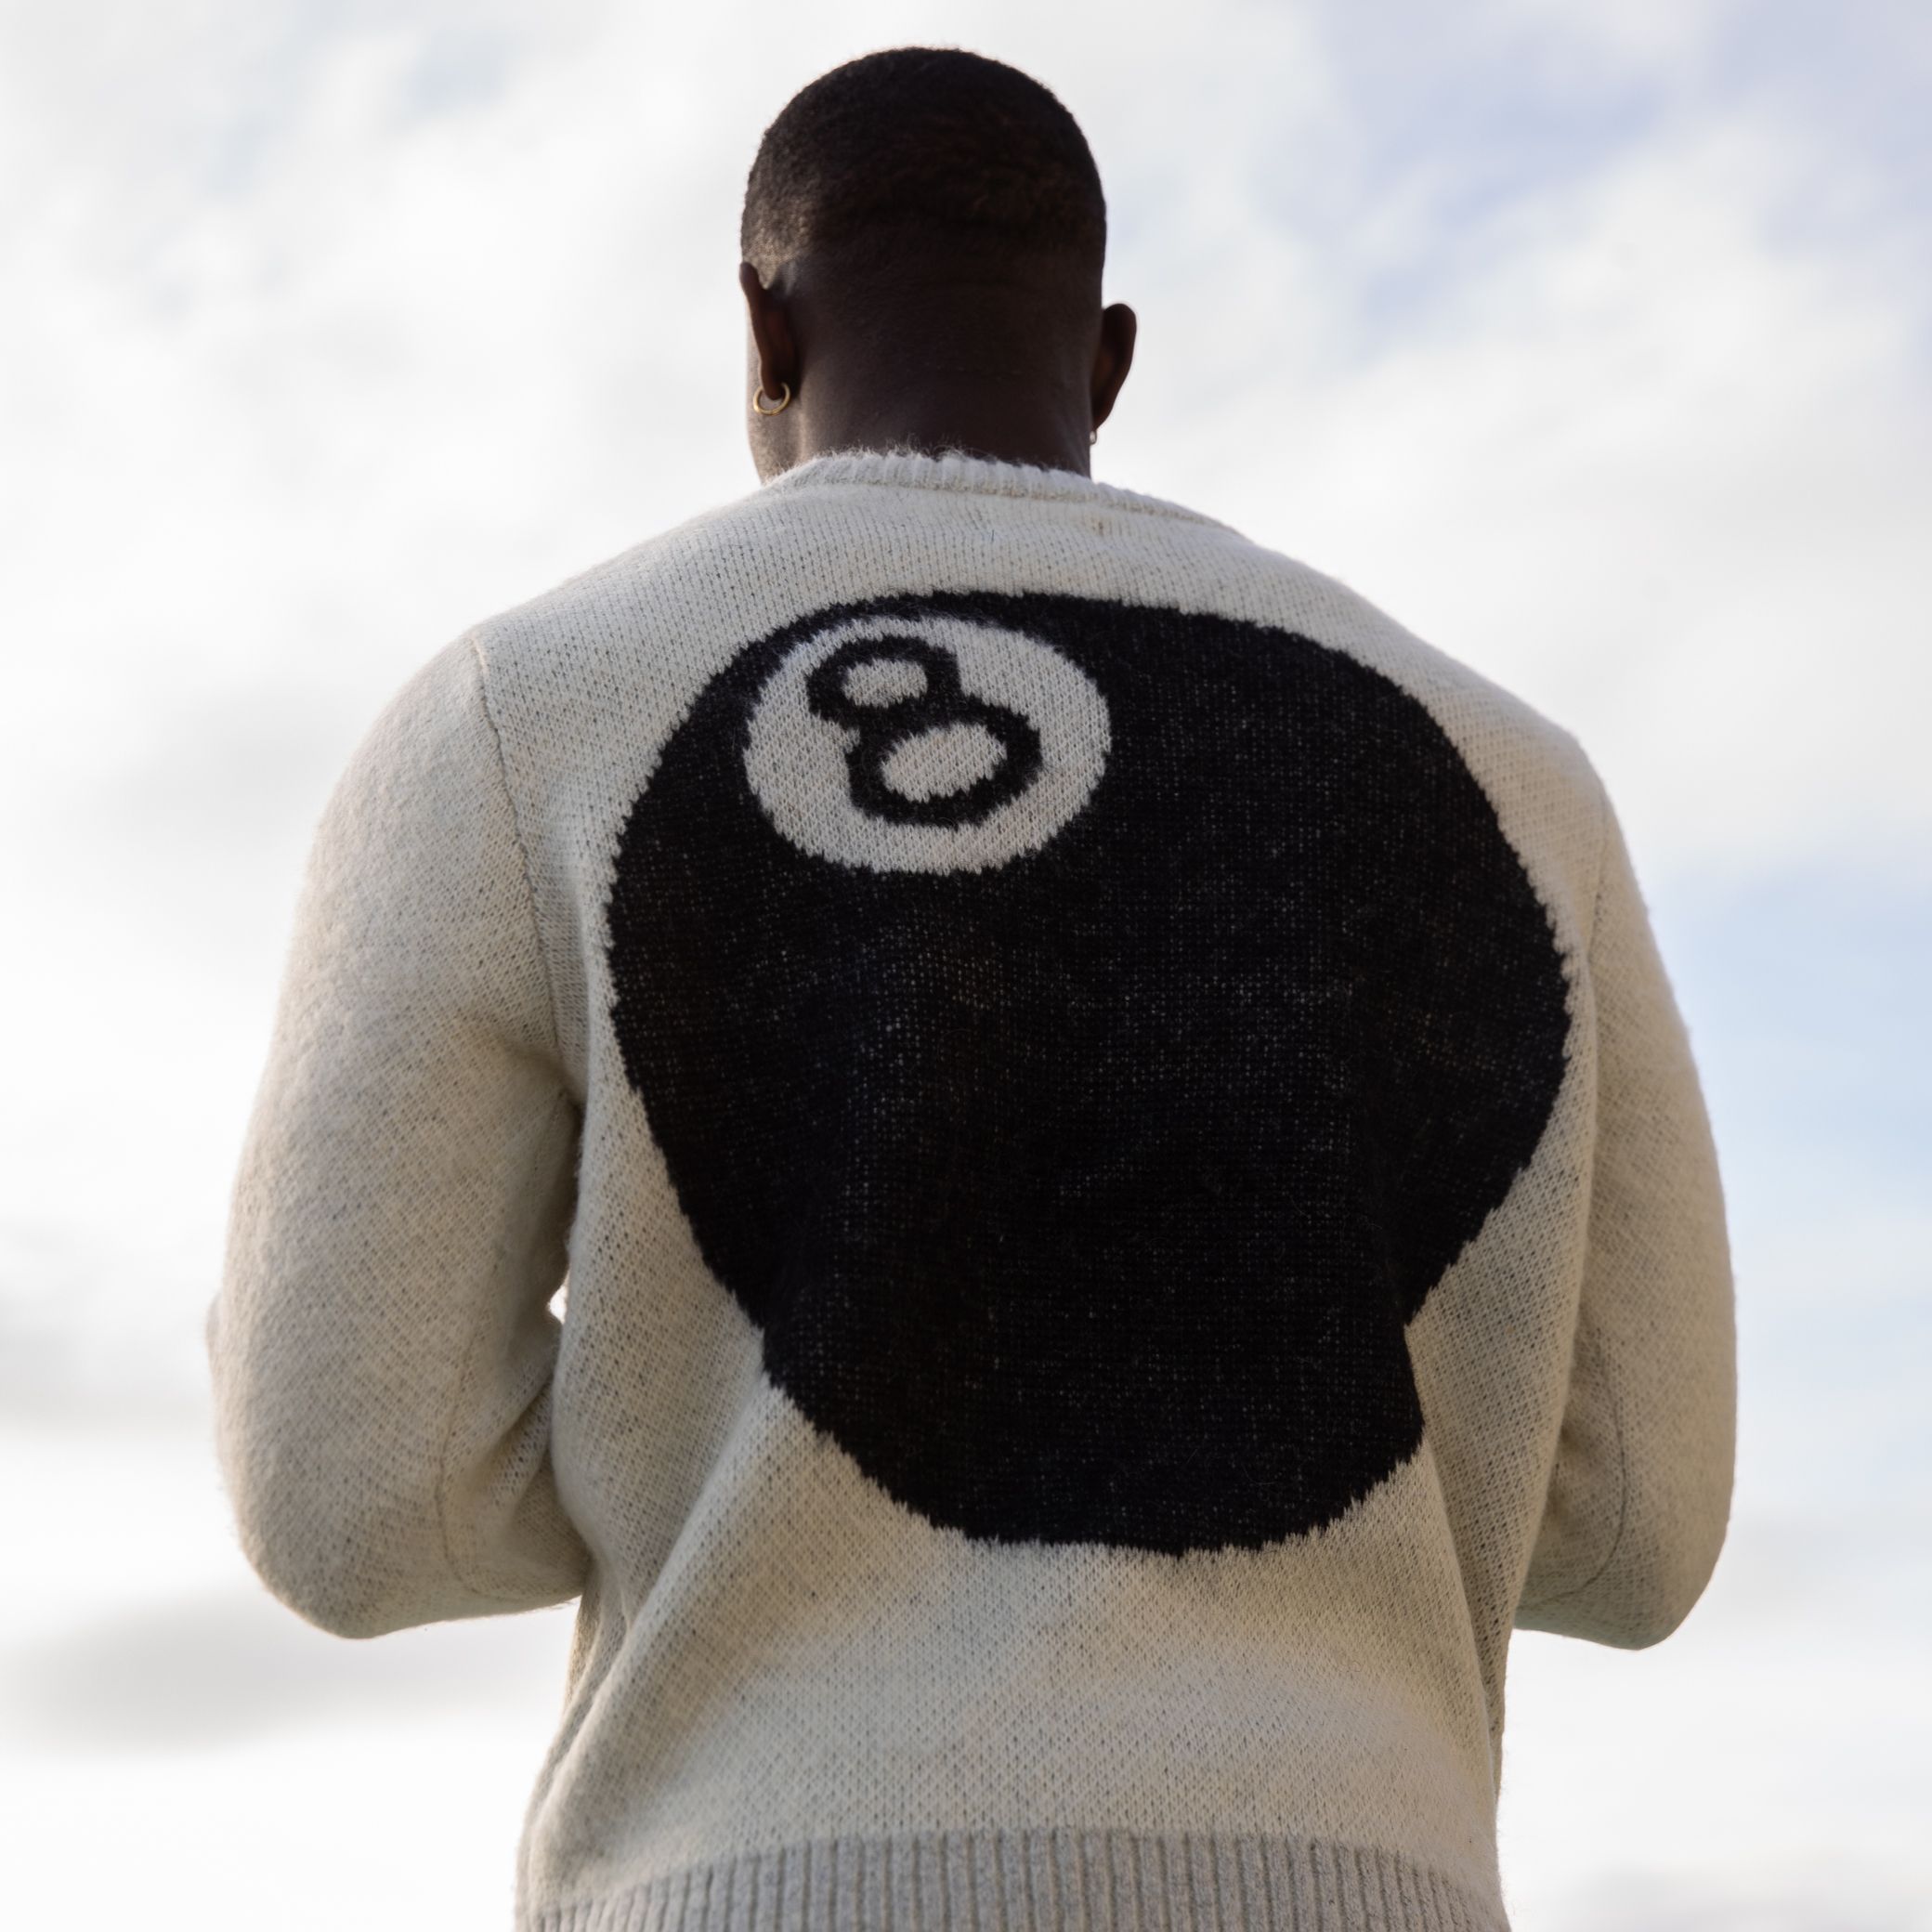 53cm着丈STUSSY 8 Ball Heavy Brushed Sweater S - mirabellor.com